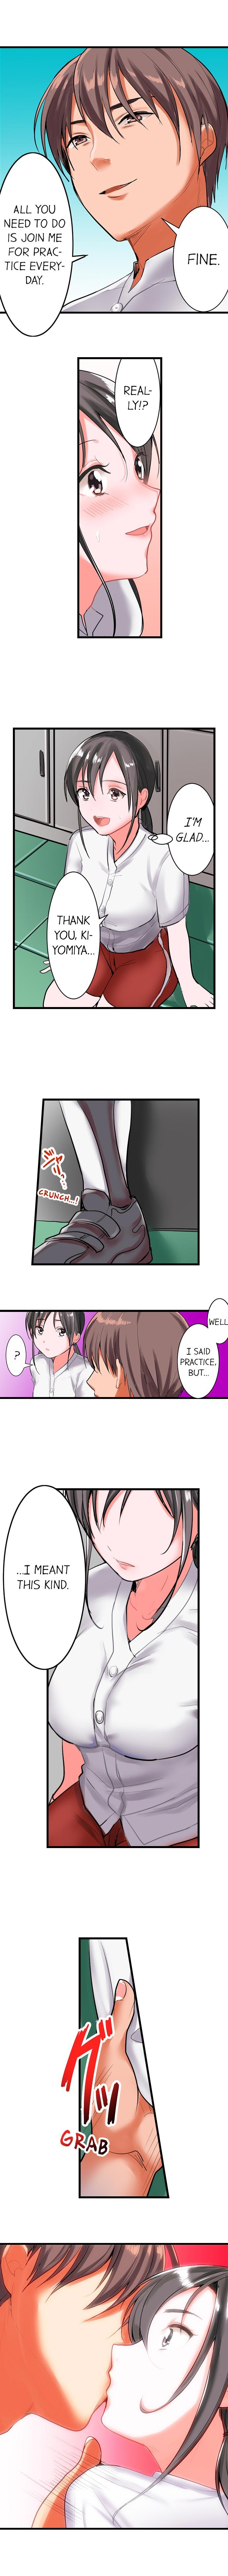 The Day She Became a Sex Toy (Complete] 11